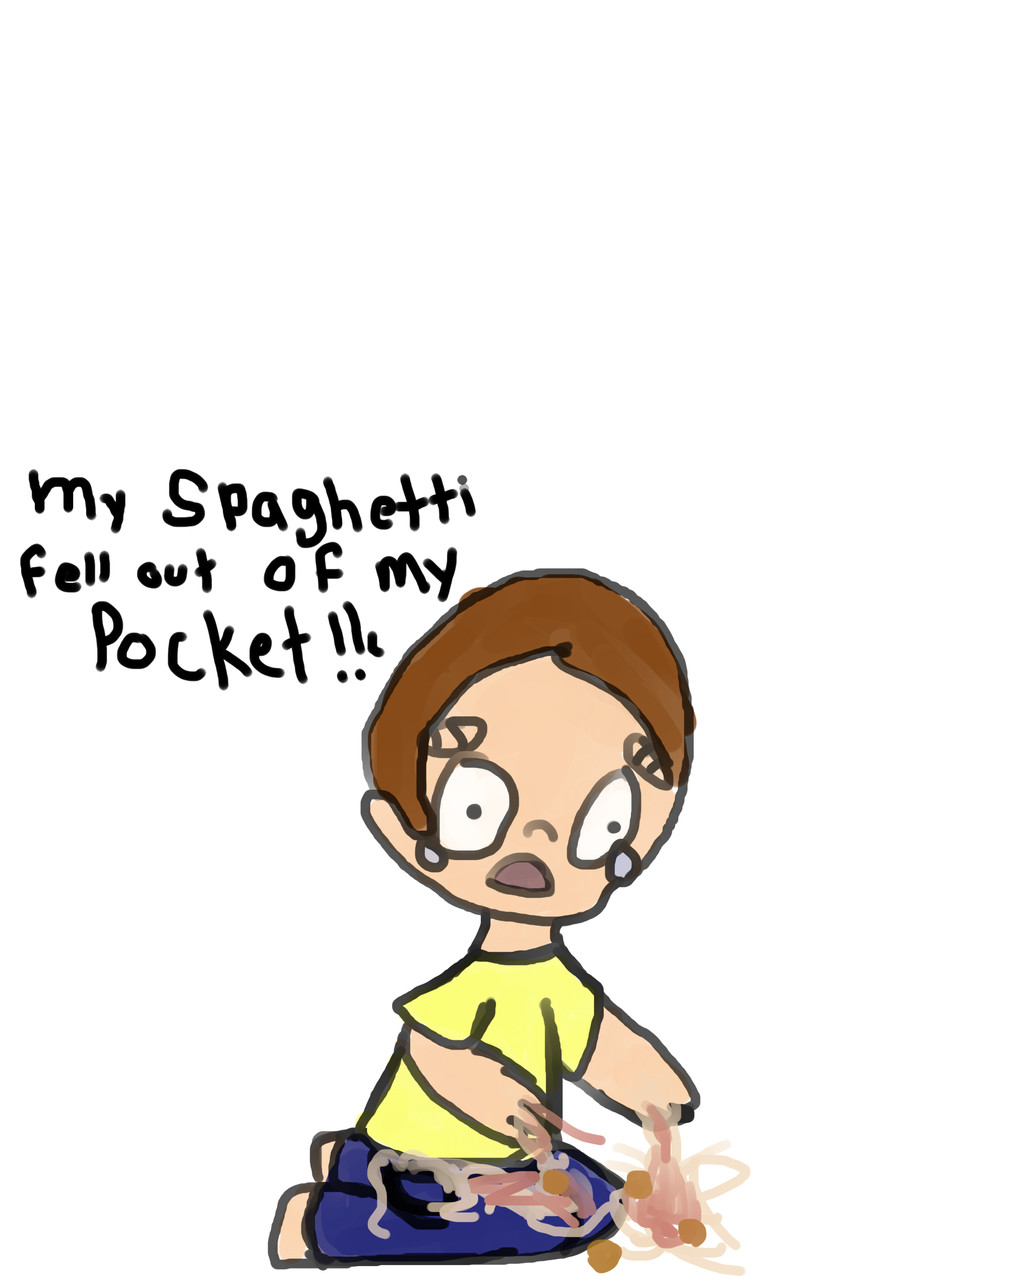 Spaghetti Falls Out Of Pocket
 My Spaghetti Fell Out My Pocket by gothguk on DeviantArt